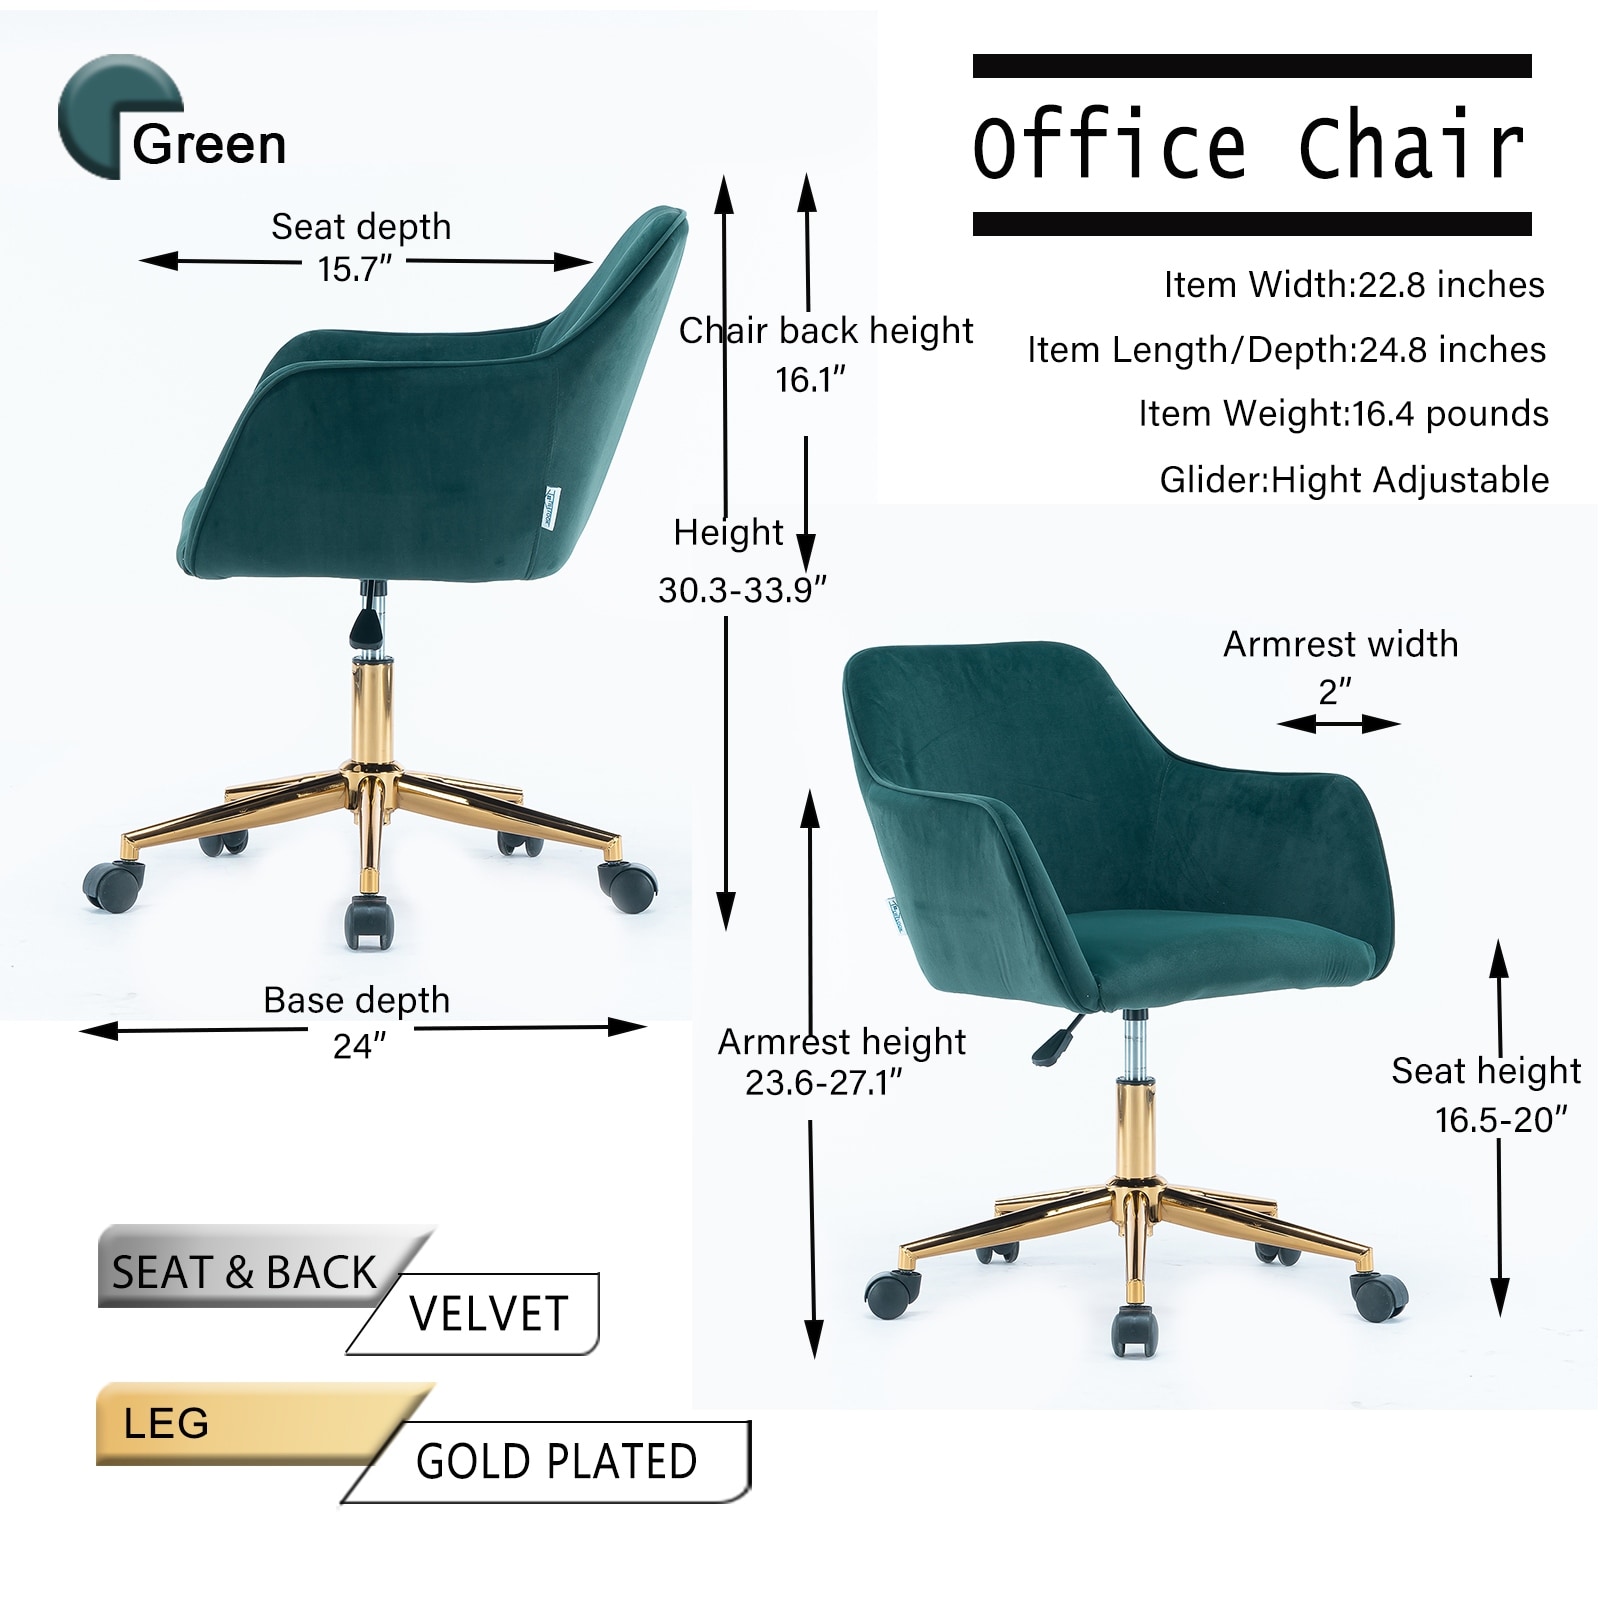 Rasoo Modern Home Office Chair, Adjustable Lift Chairs with Metal Legs and Universal Wheel For Indoor